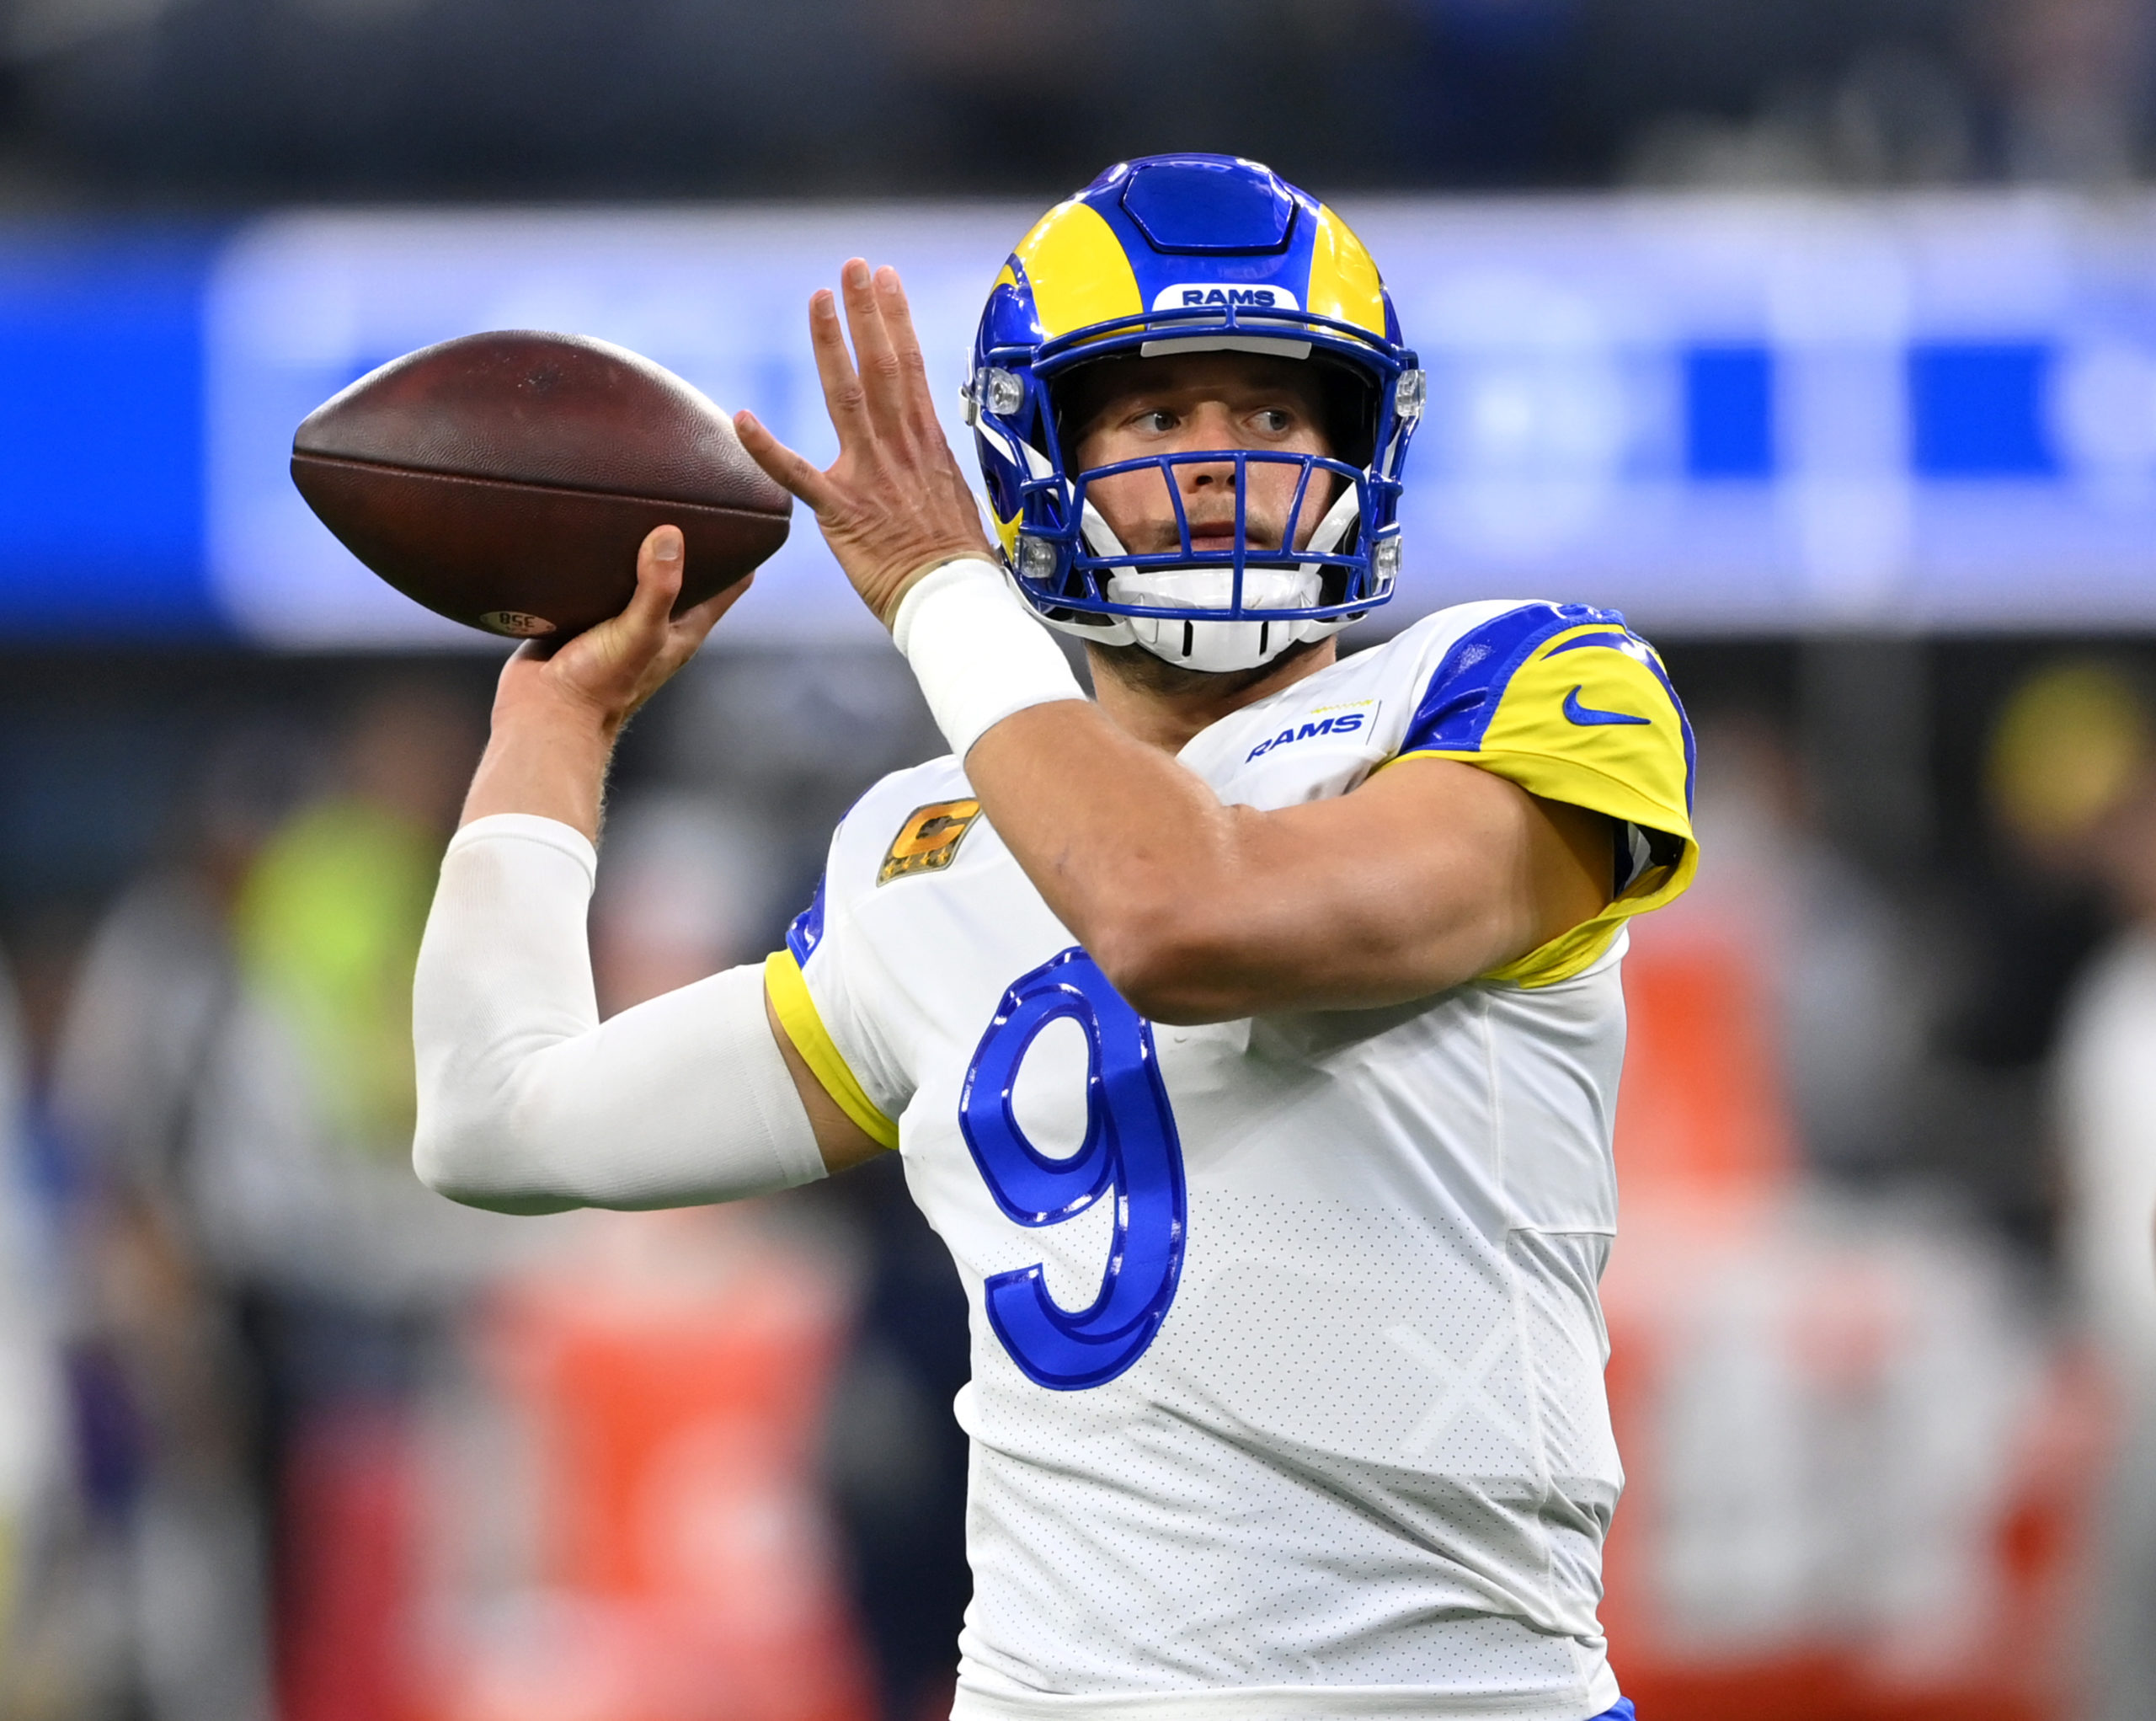 New-Look Rams Visiting Packers in Rematch of Playoff Game – NBC Los Angeles